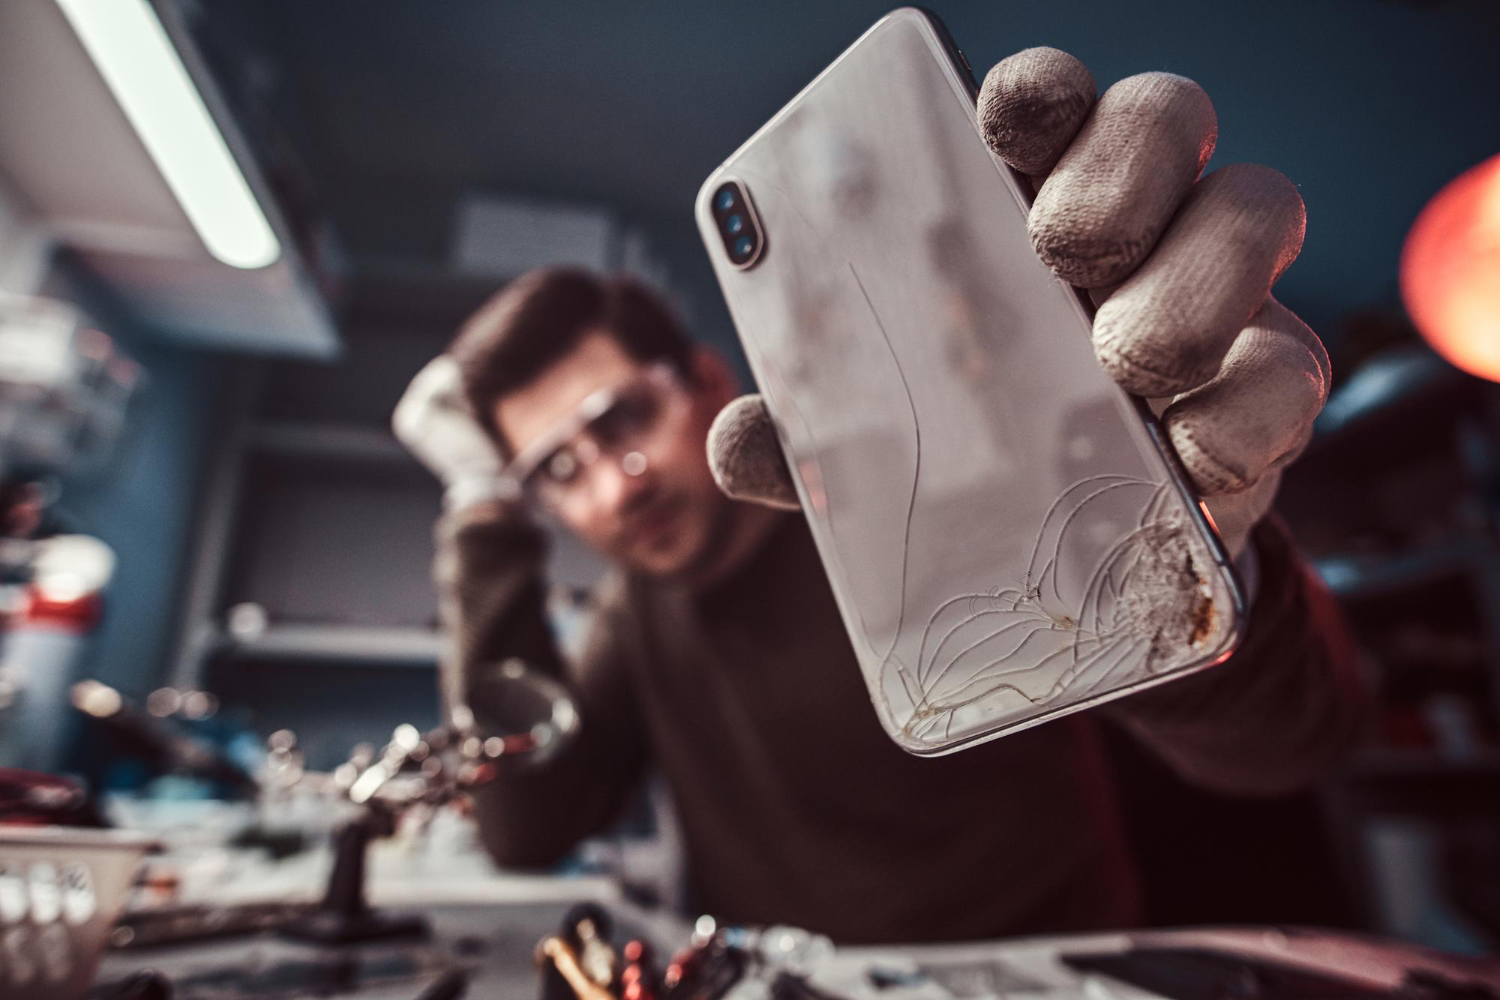 Technician showing a smartphone with a broken screen getting fixed in a repair shop in Washington DC